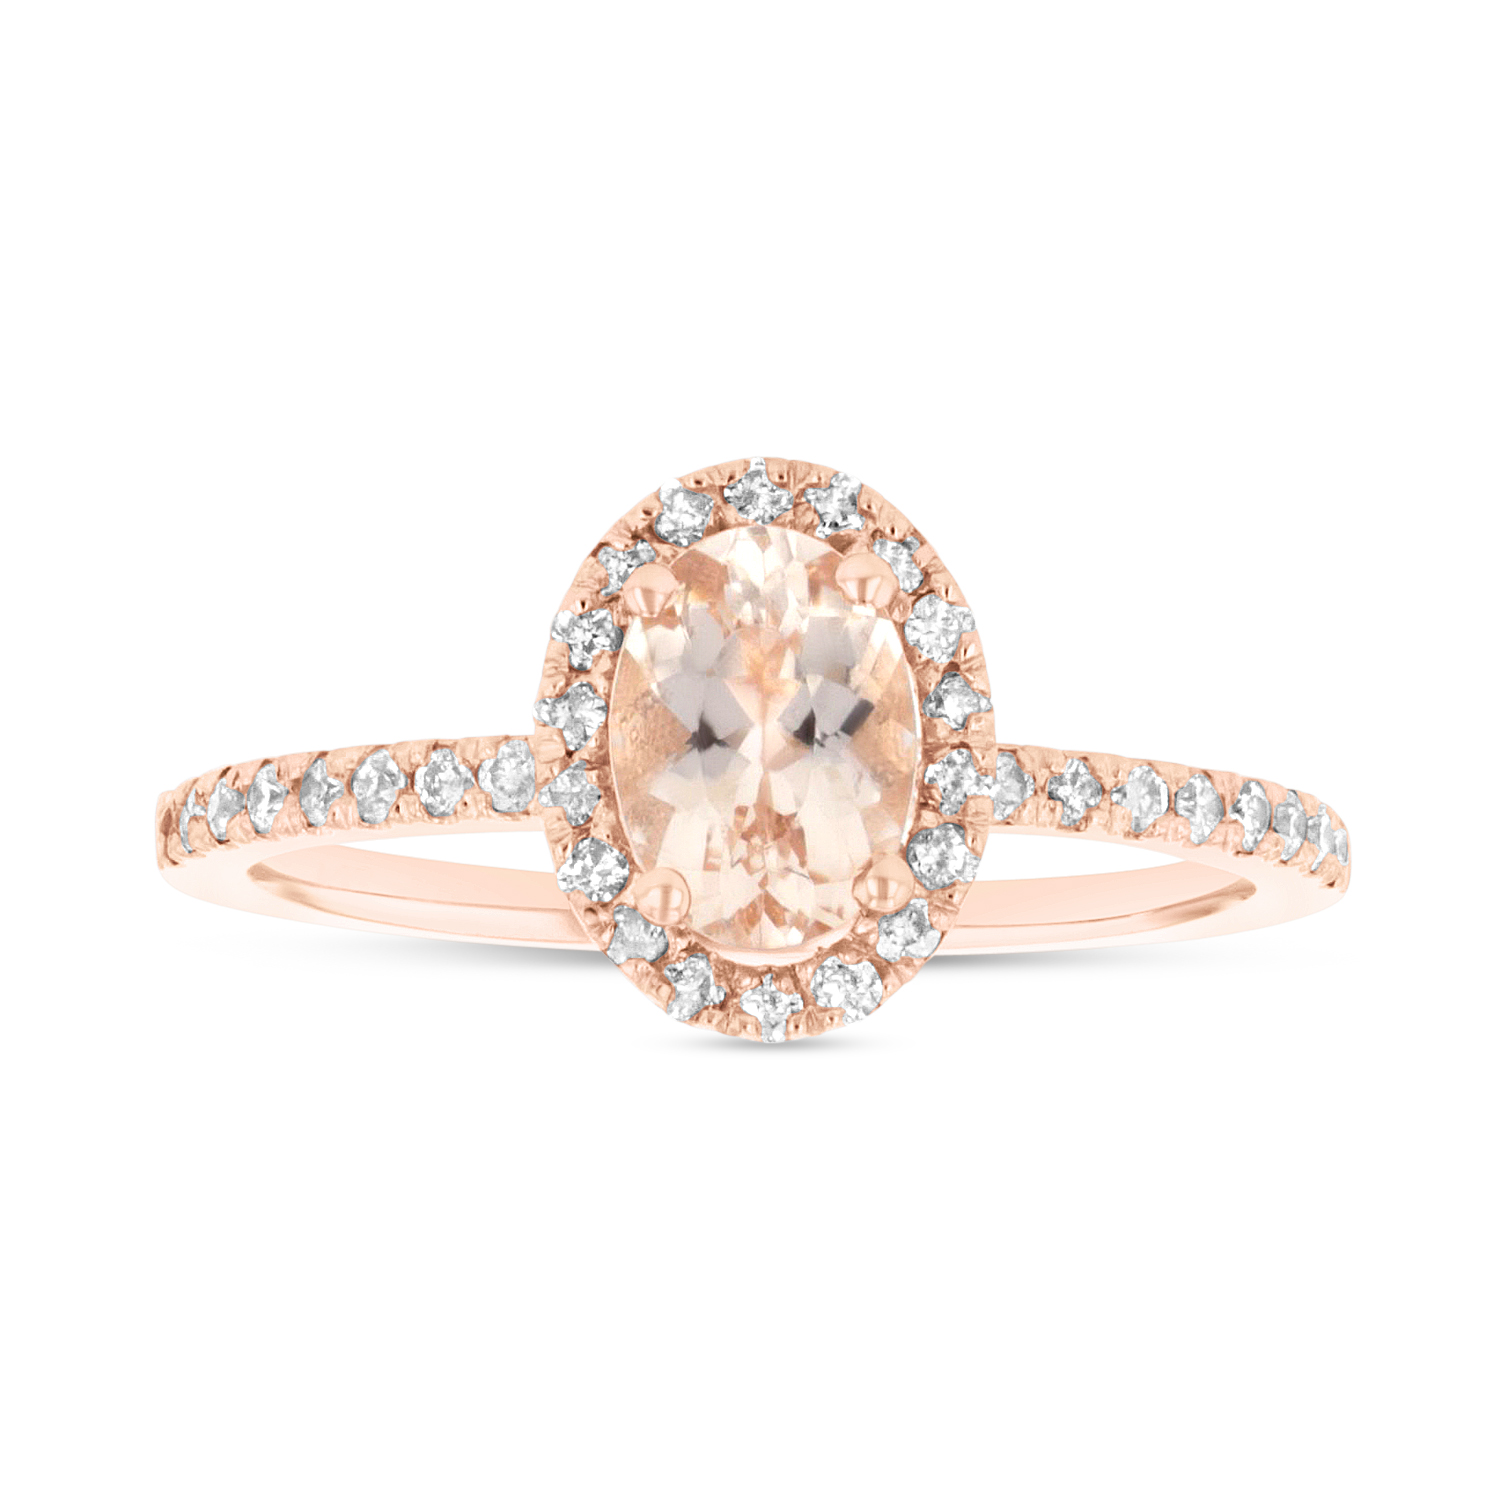 View 7X5 mm Oval Morganite and Diamond Ring in 14k Rose Gold